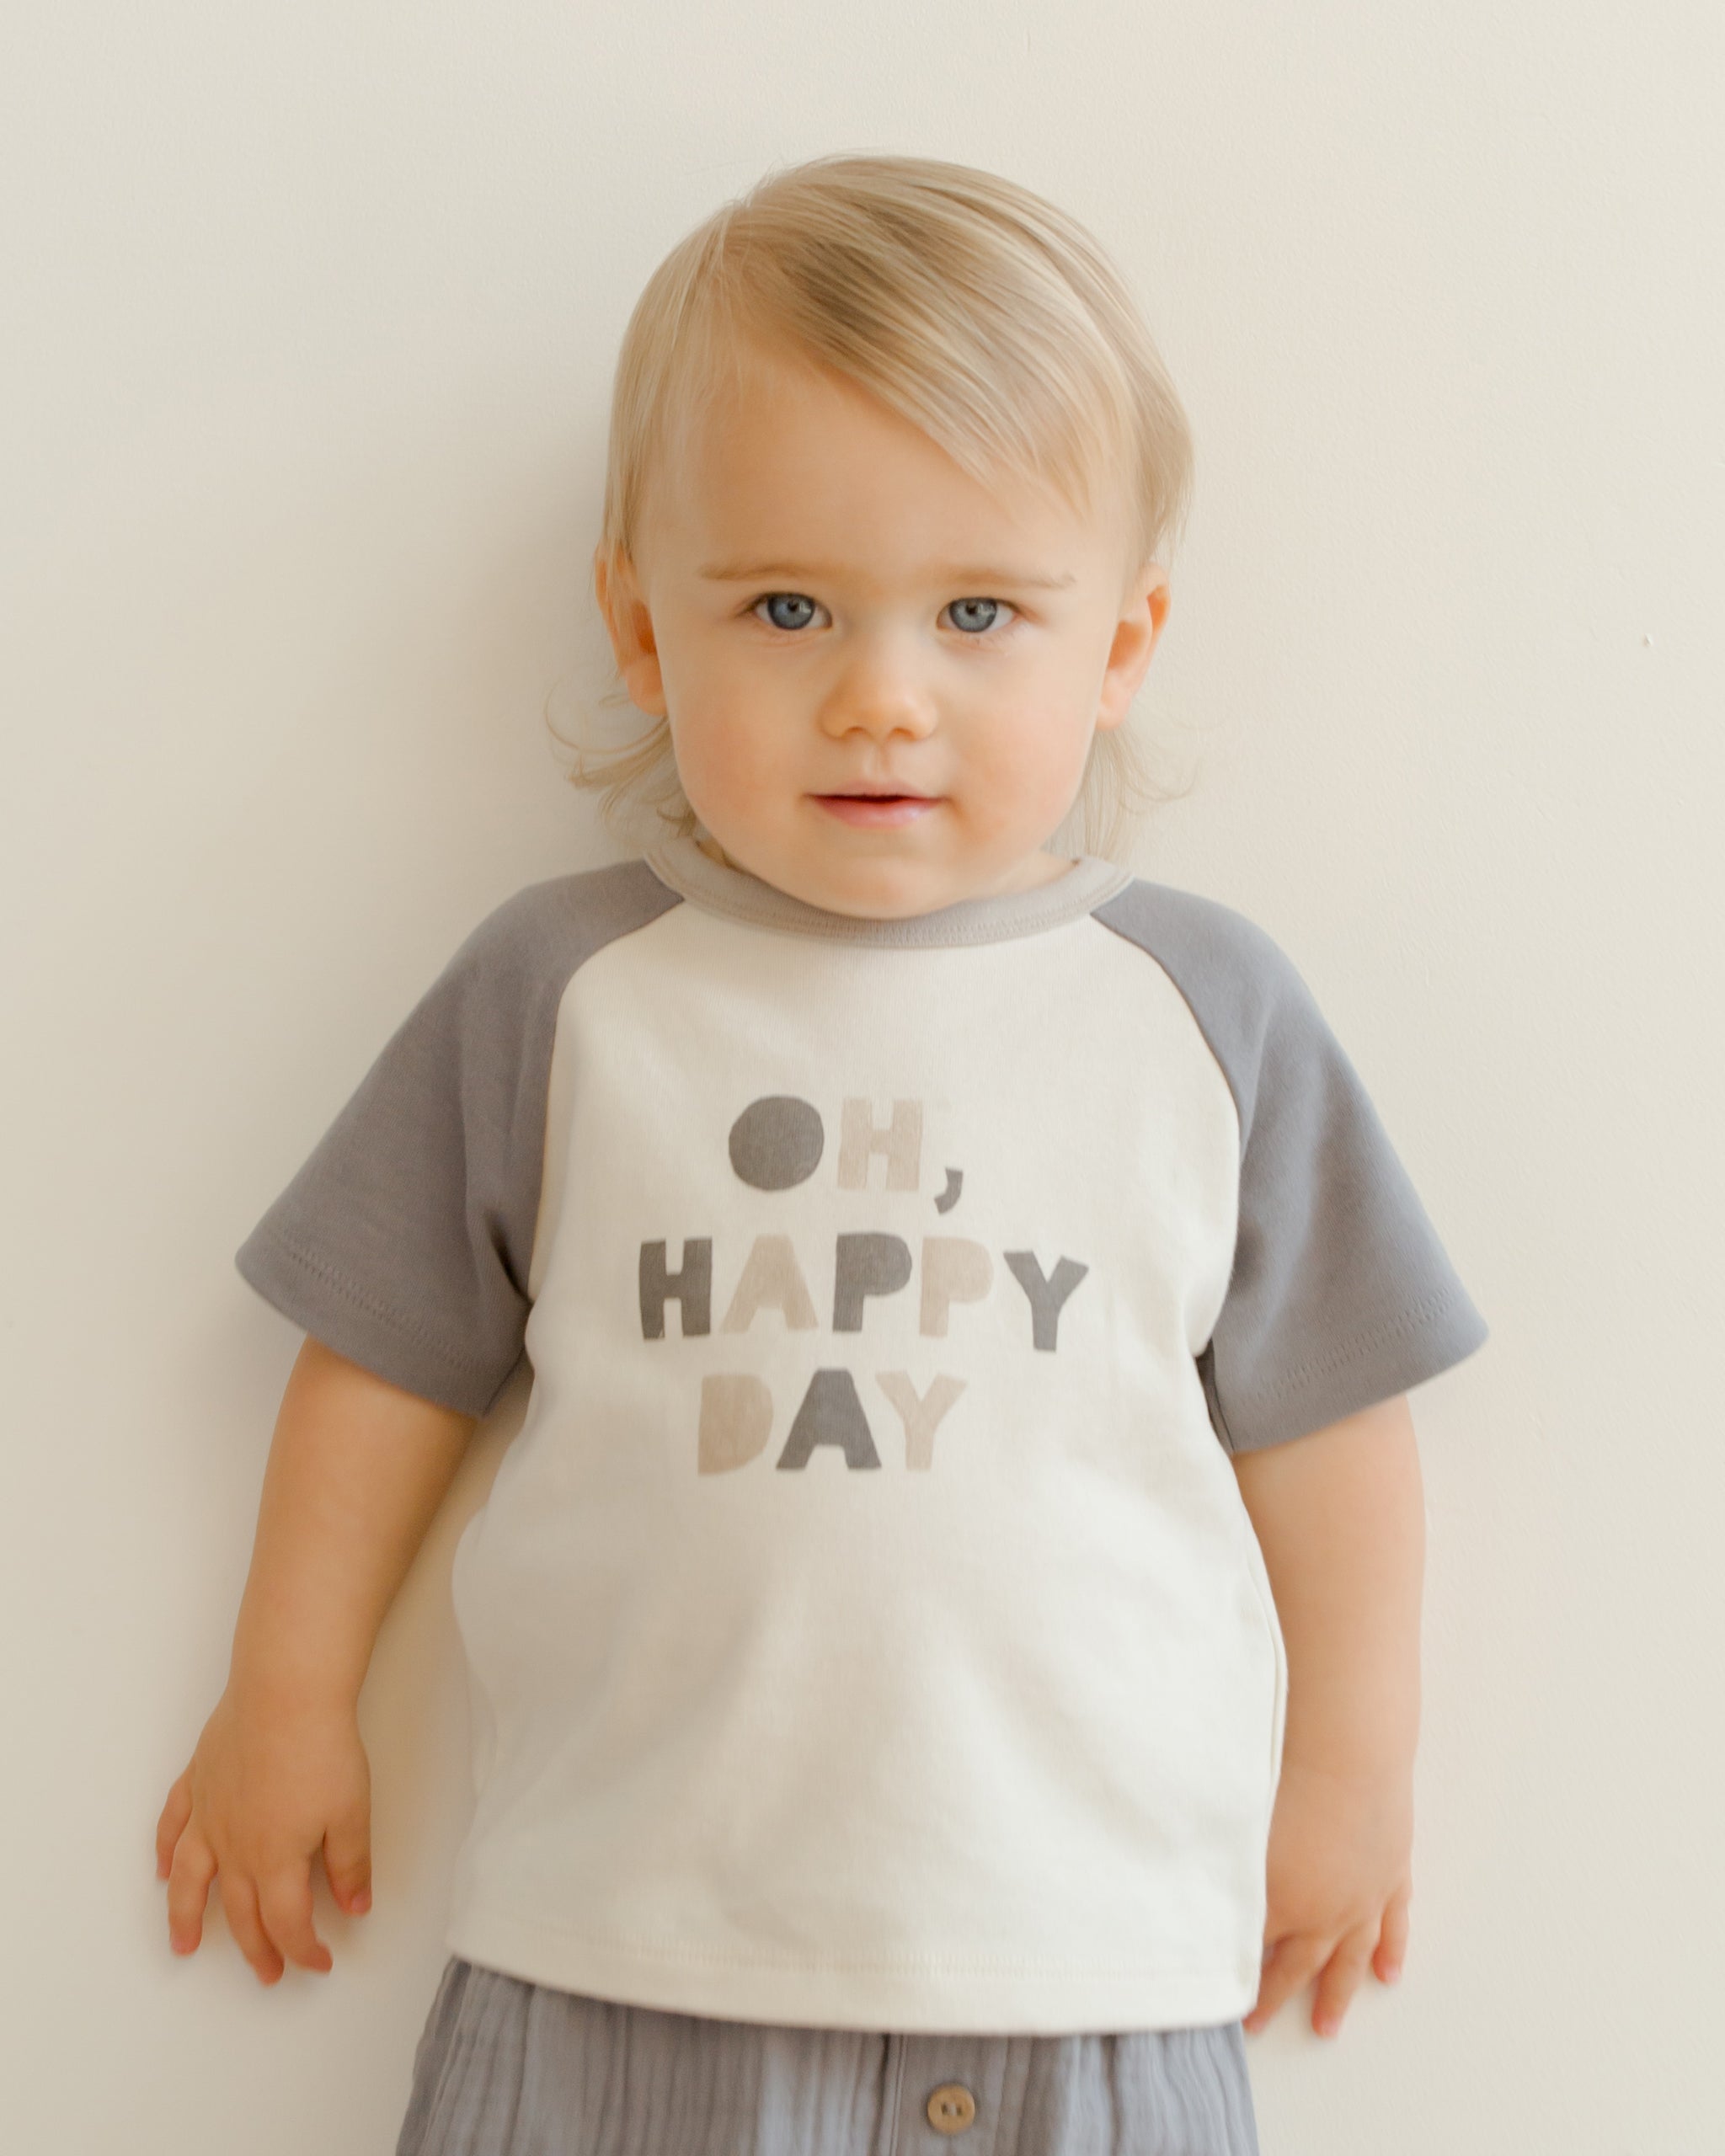 Color Block Raglan Tee || Oh, Happy Day - Rylee + Cru | Kids Clothes | Trendy Baby Clothes | Modern Infant Outfits |